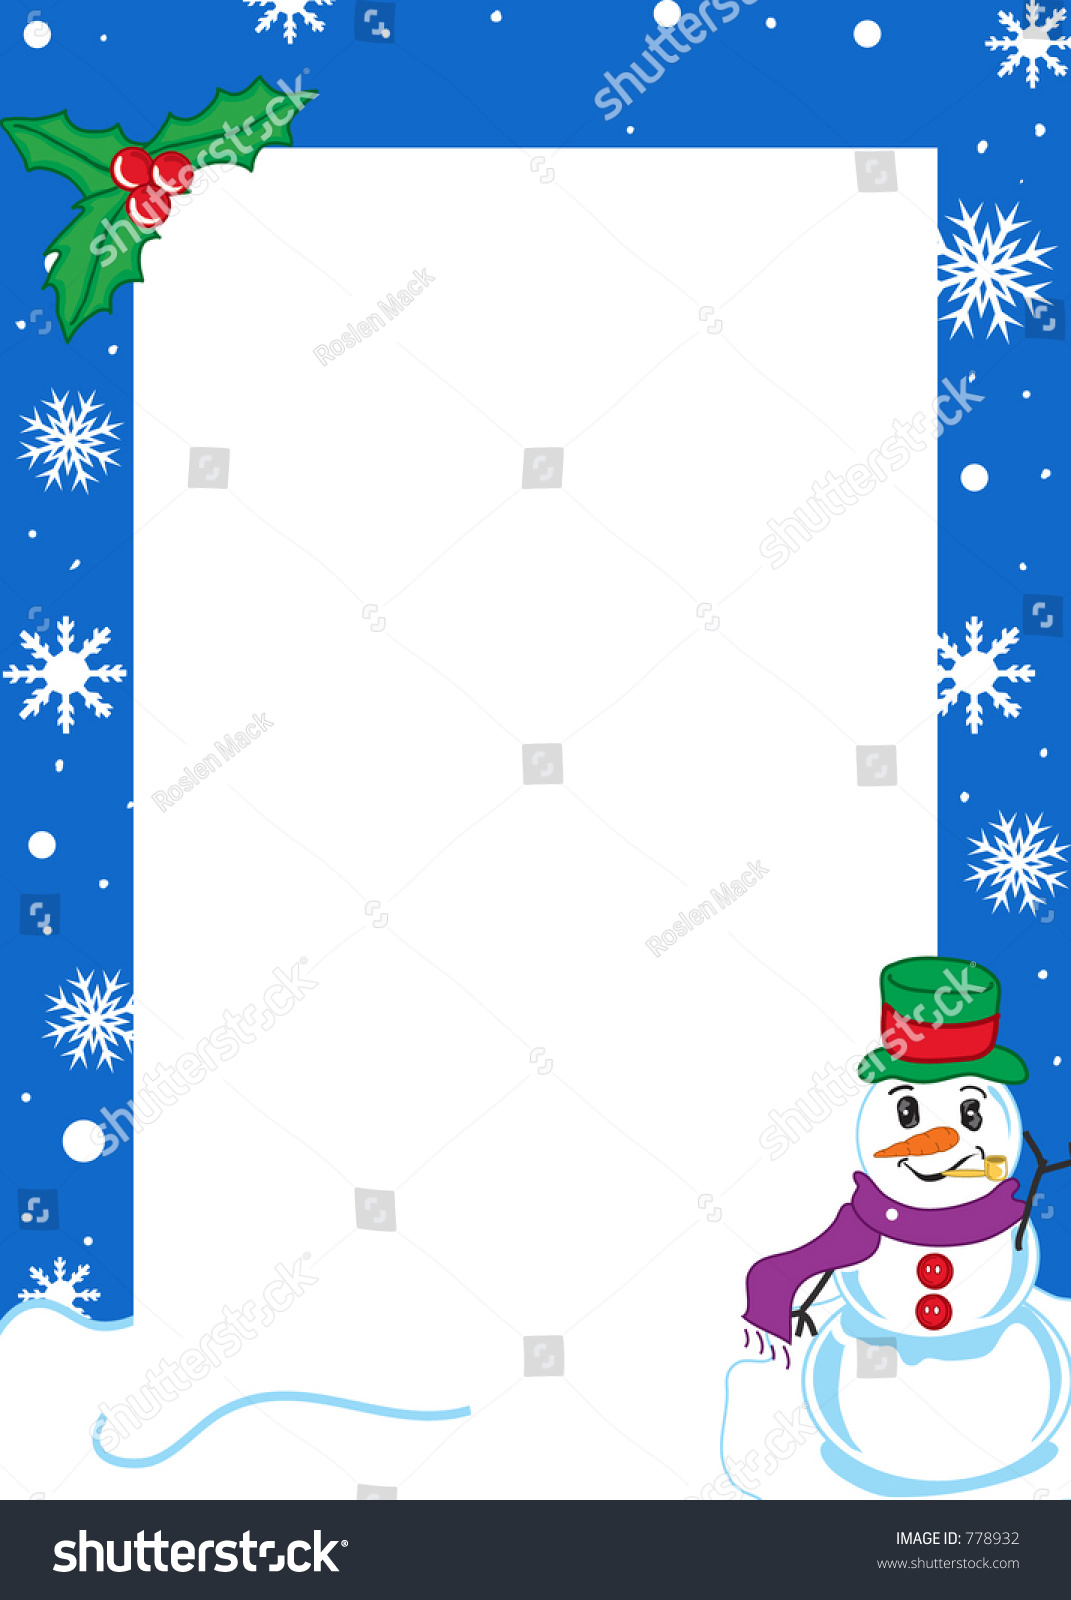 Winter Border With Snowflakes And A Snowman. Stock Photo 778932 ...